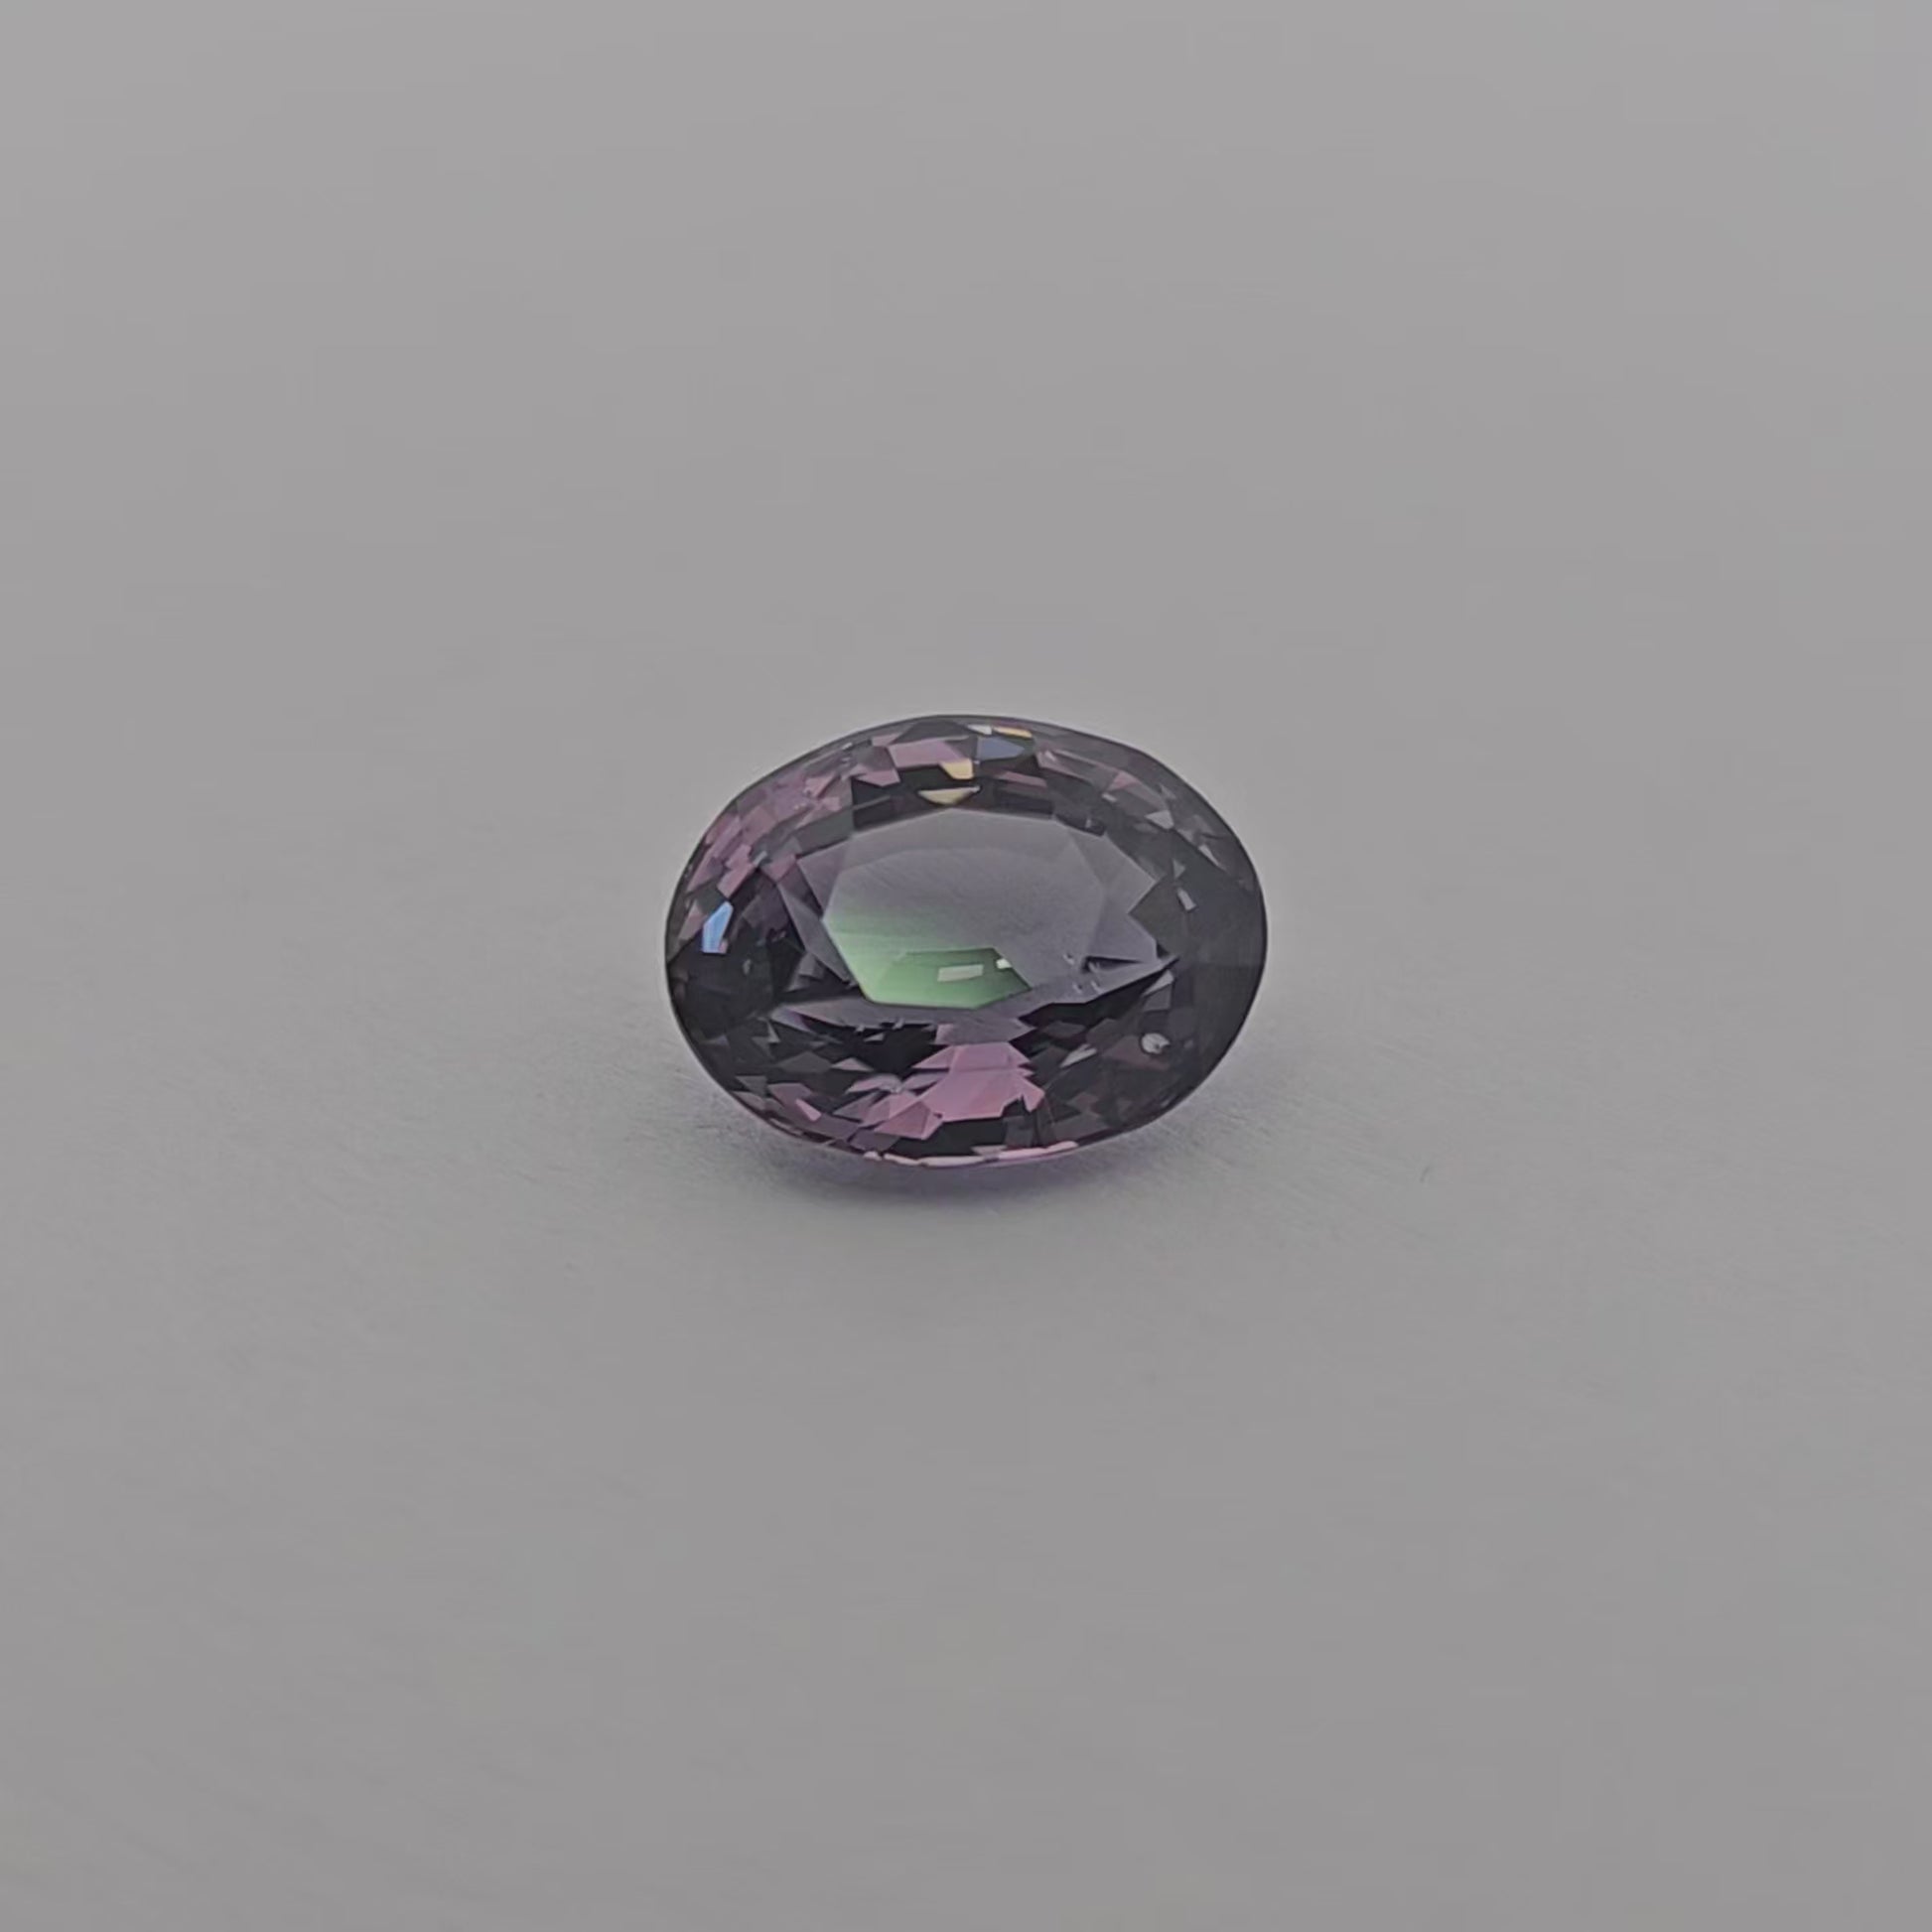 loose Natural Purple Spinel Stone 3.56 Carats Oval Shape (9.95 x 7.61 x 5.77 mm)